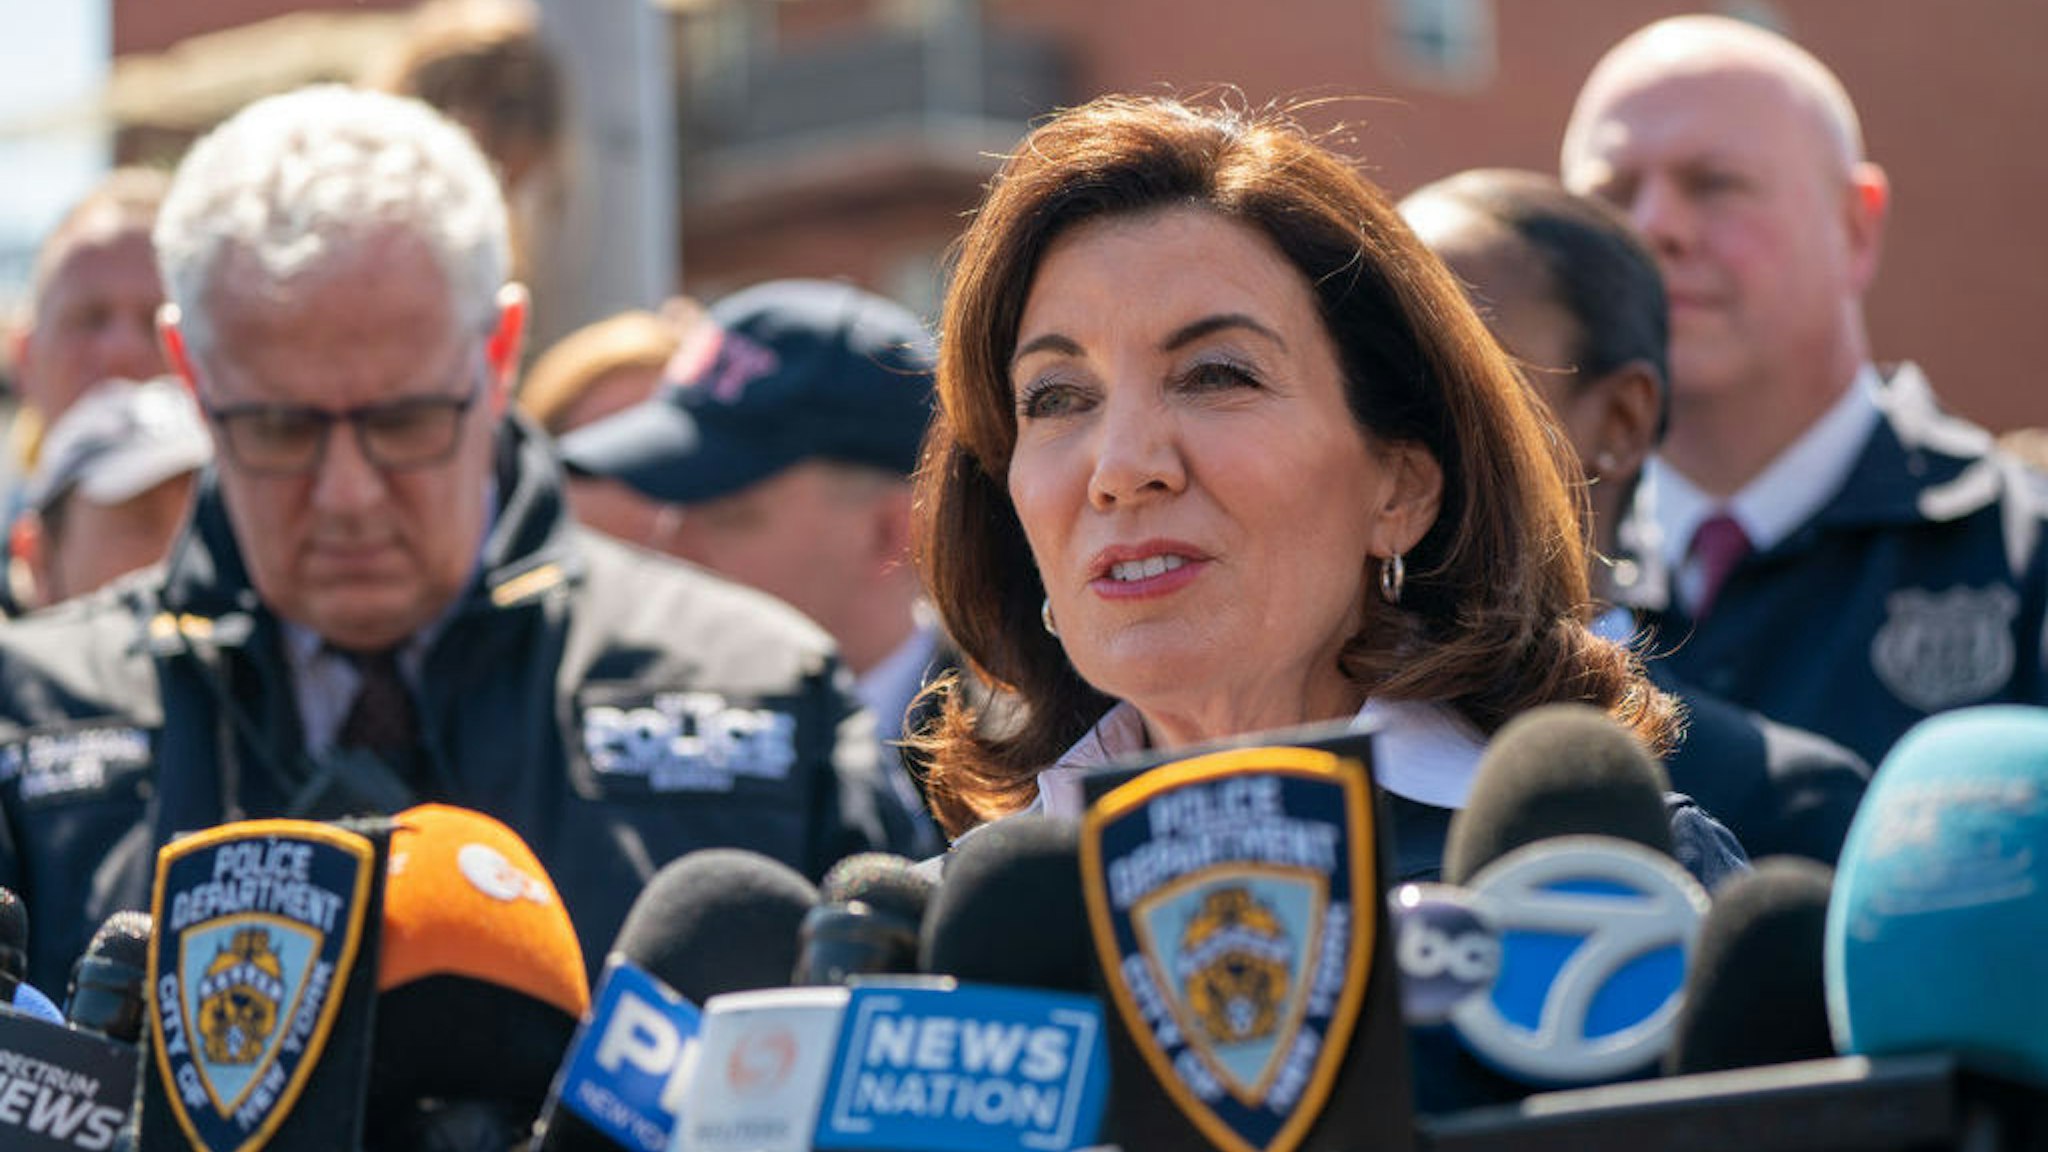 NEW YORK, NY - APRIL 12: New York State Governor Kathy Hochul speaks during a press conference at the site of a shooting at the 36 St subway station on April 12, 2022 in New York City. According to authorities, 16 people have been injured, including 10 with gunshot wounds, in a shooting at the 36th Street and Fourth Avenue station in the Sunset Park neighborhood. (Photo by David Dee Delgado/Getty Images)